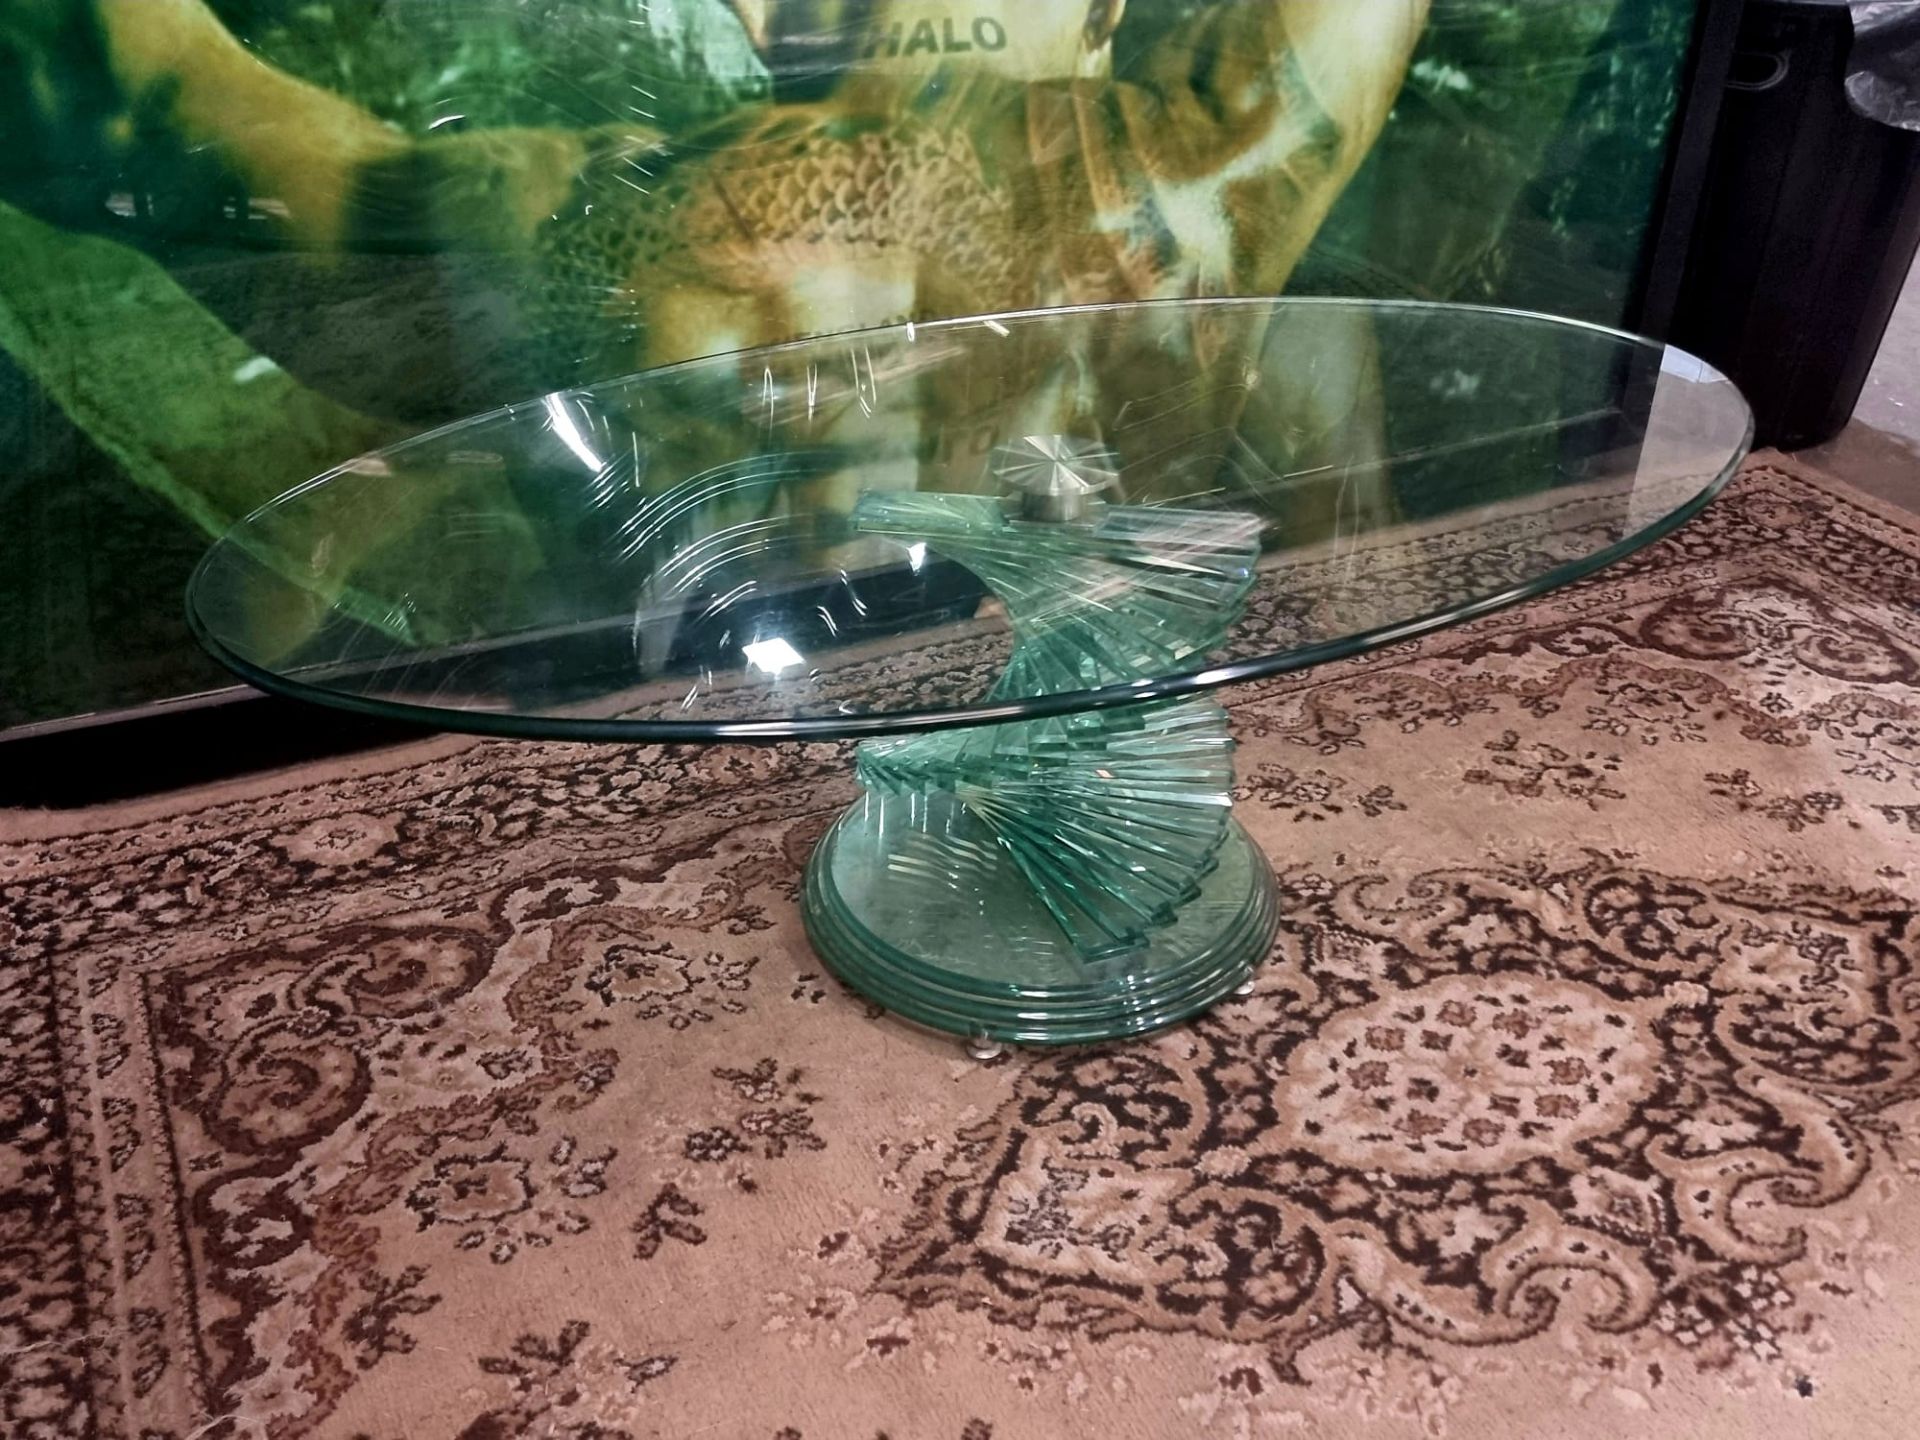 Ravello Spiral Glass Italian Design Ovoid Coffee Table A Mid Century Design Table With A Light Green - Image 6 of 8